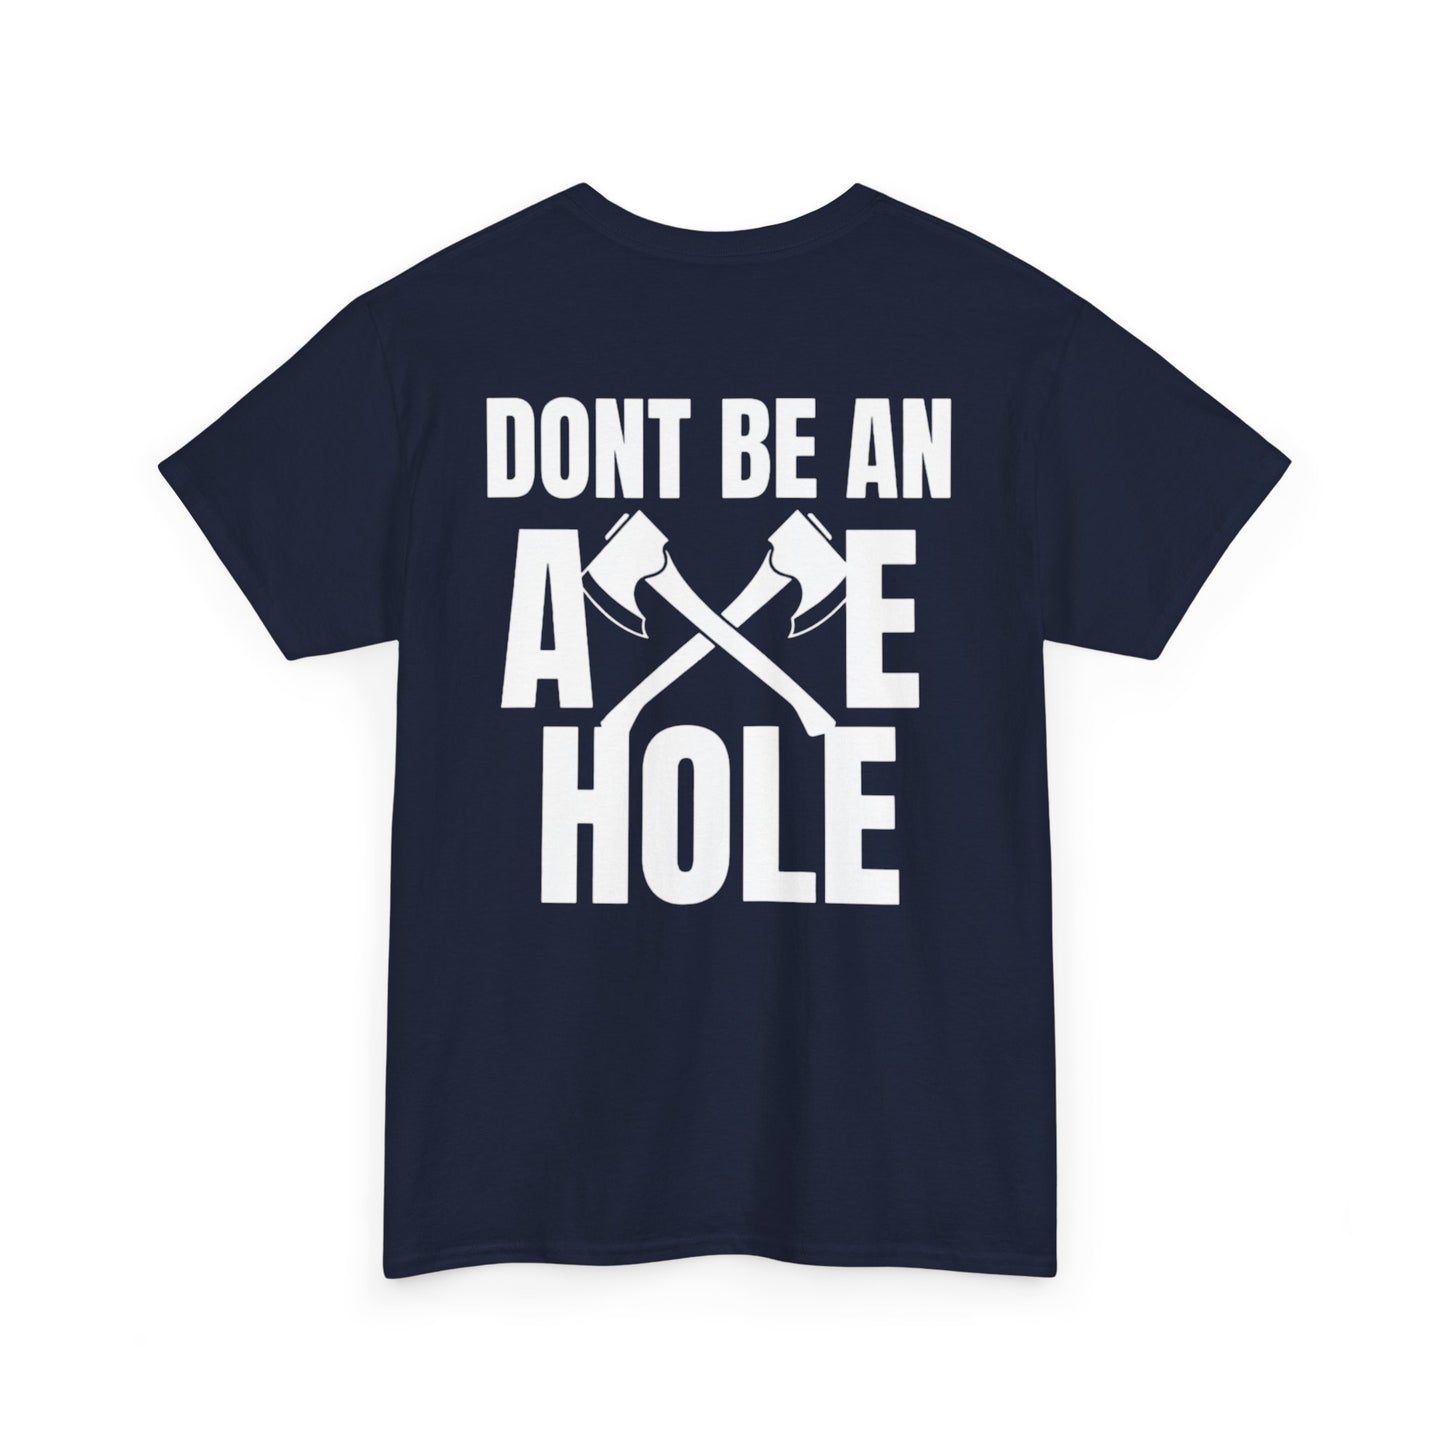 Don't Be An Axe Hole "White"